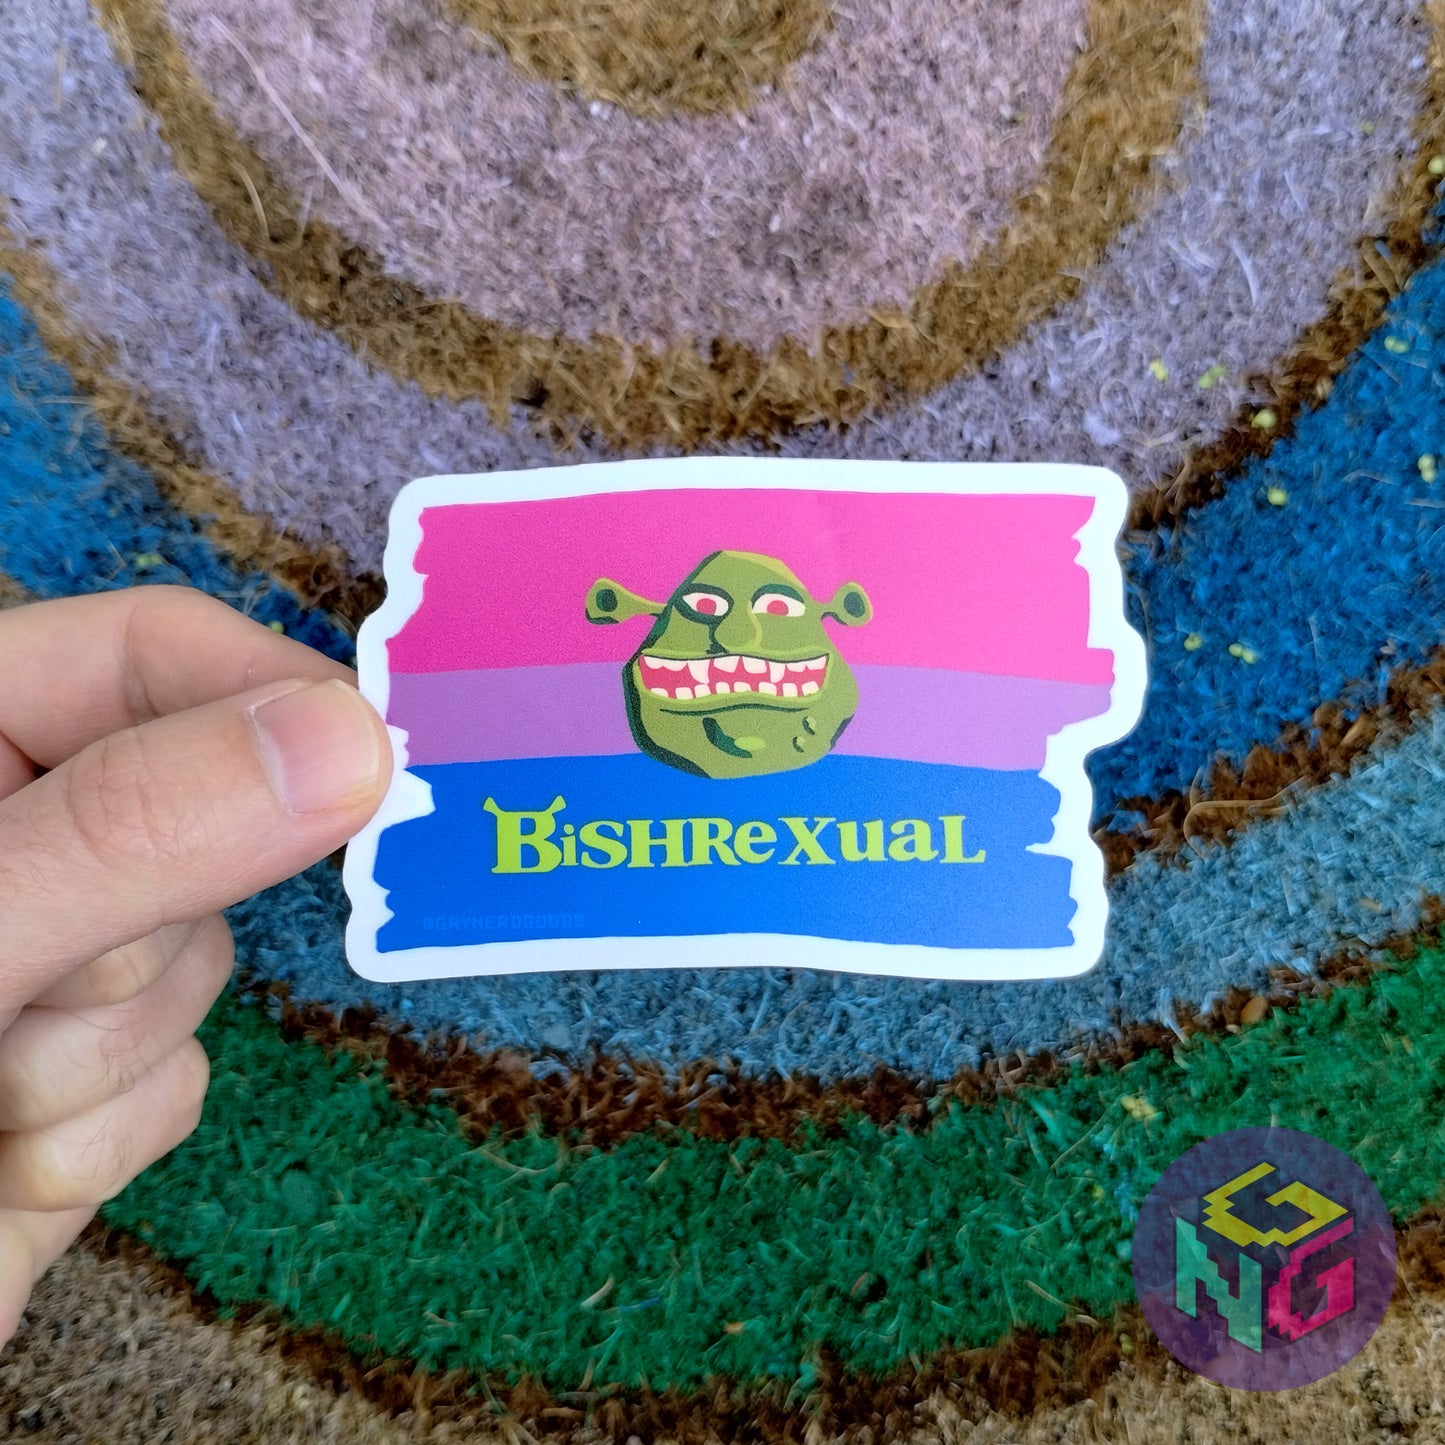 vinyl bisexual bishrexual sticker held in a hand in front of a rainbow welcome mat